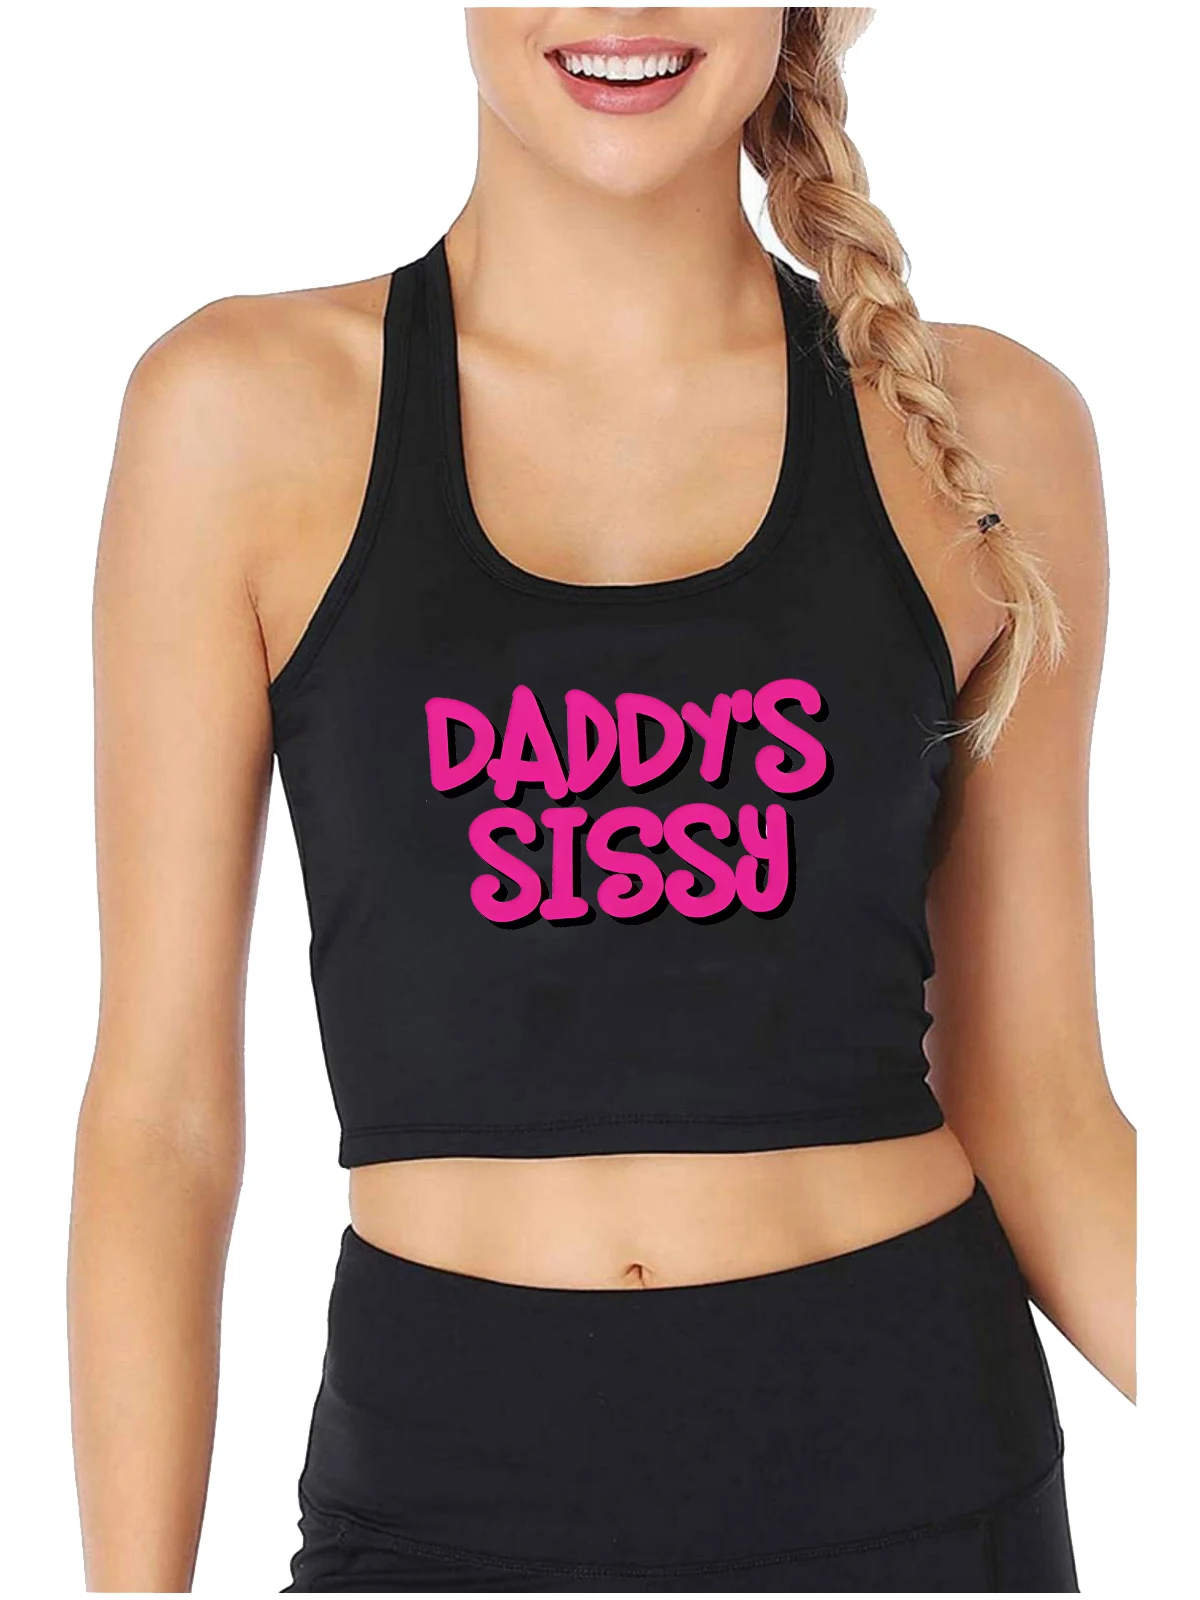 

Daddy's Sissy Design Sexy Slim Fit Crop Top Sugar Baby Humorous Fun Flirting Tank Tops Girl's Naughty Sports Camisole